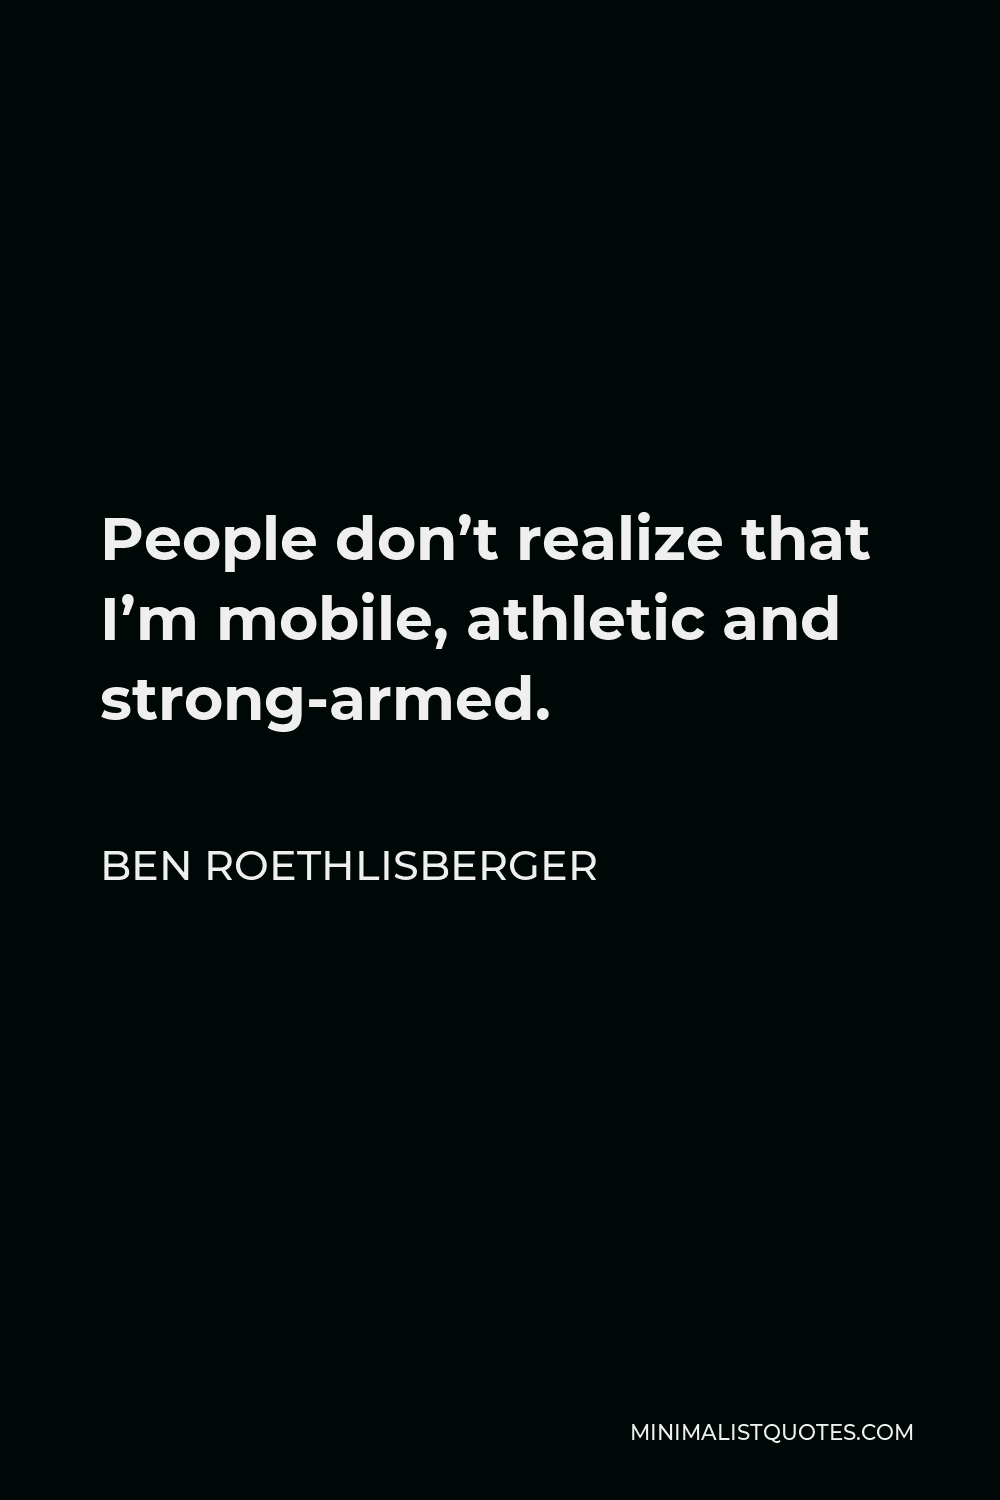 Ben Roethlisberger Quote - People don’t realize that I’m mobile, athletic and strong-armed.